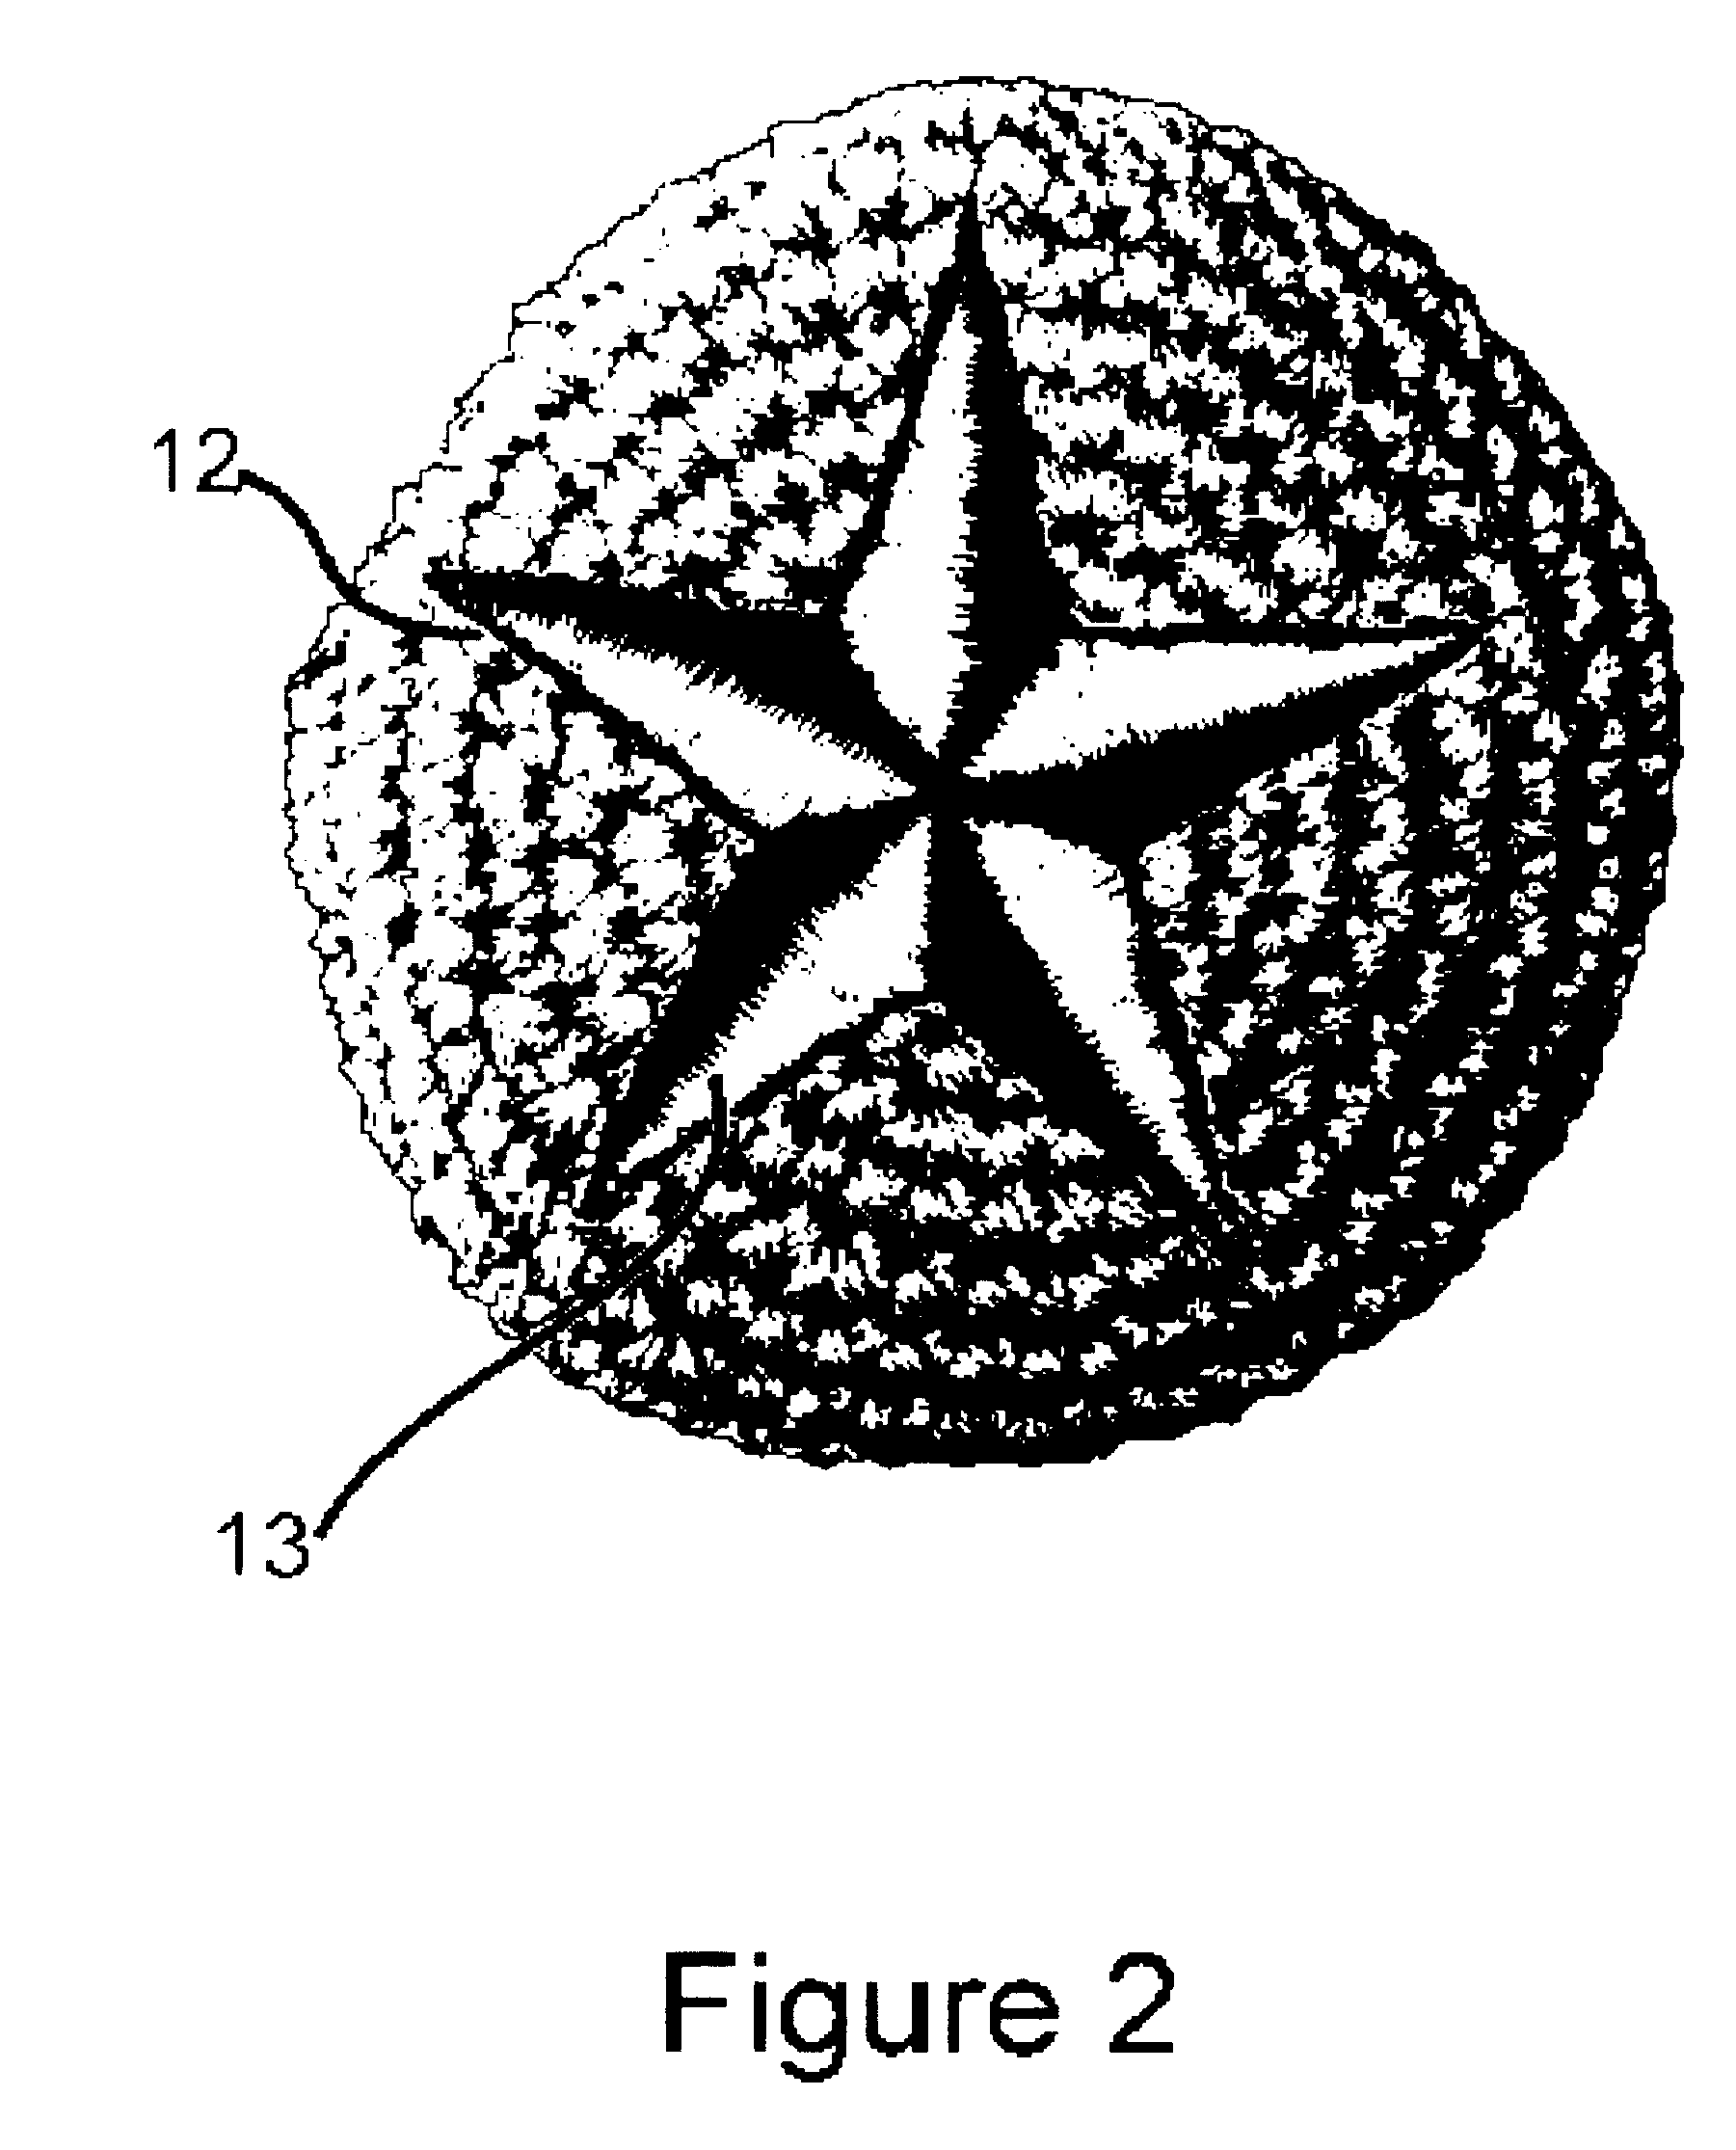 Spherical crocheted object having embroidery and the method of manufacture thereof